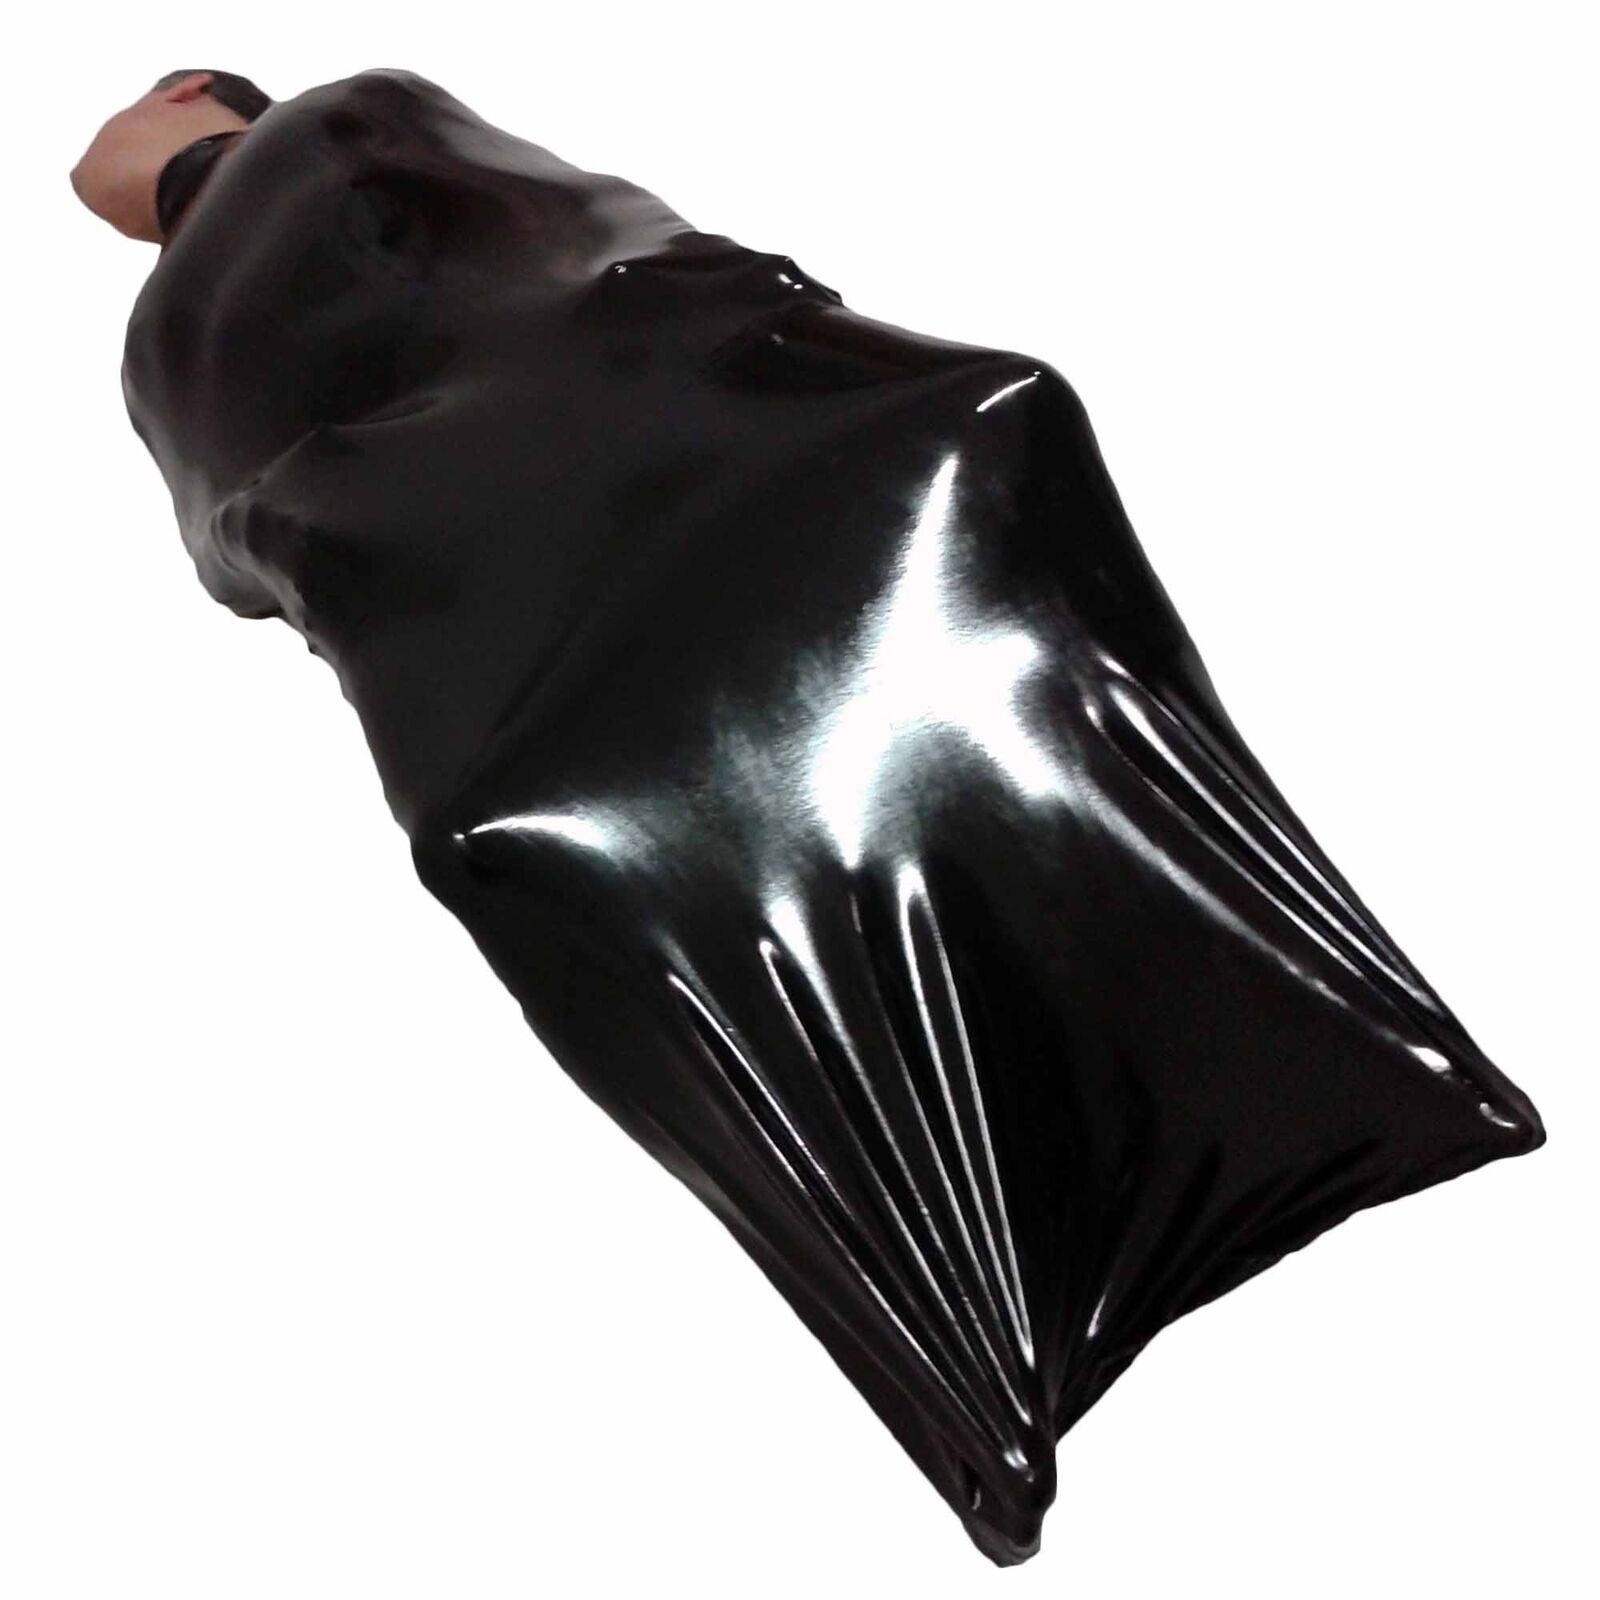 Brand New Latex Rubber Black Today's only Big one Sauna Body Sleep Bag Sack Max 47% OFF